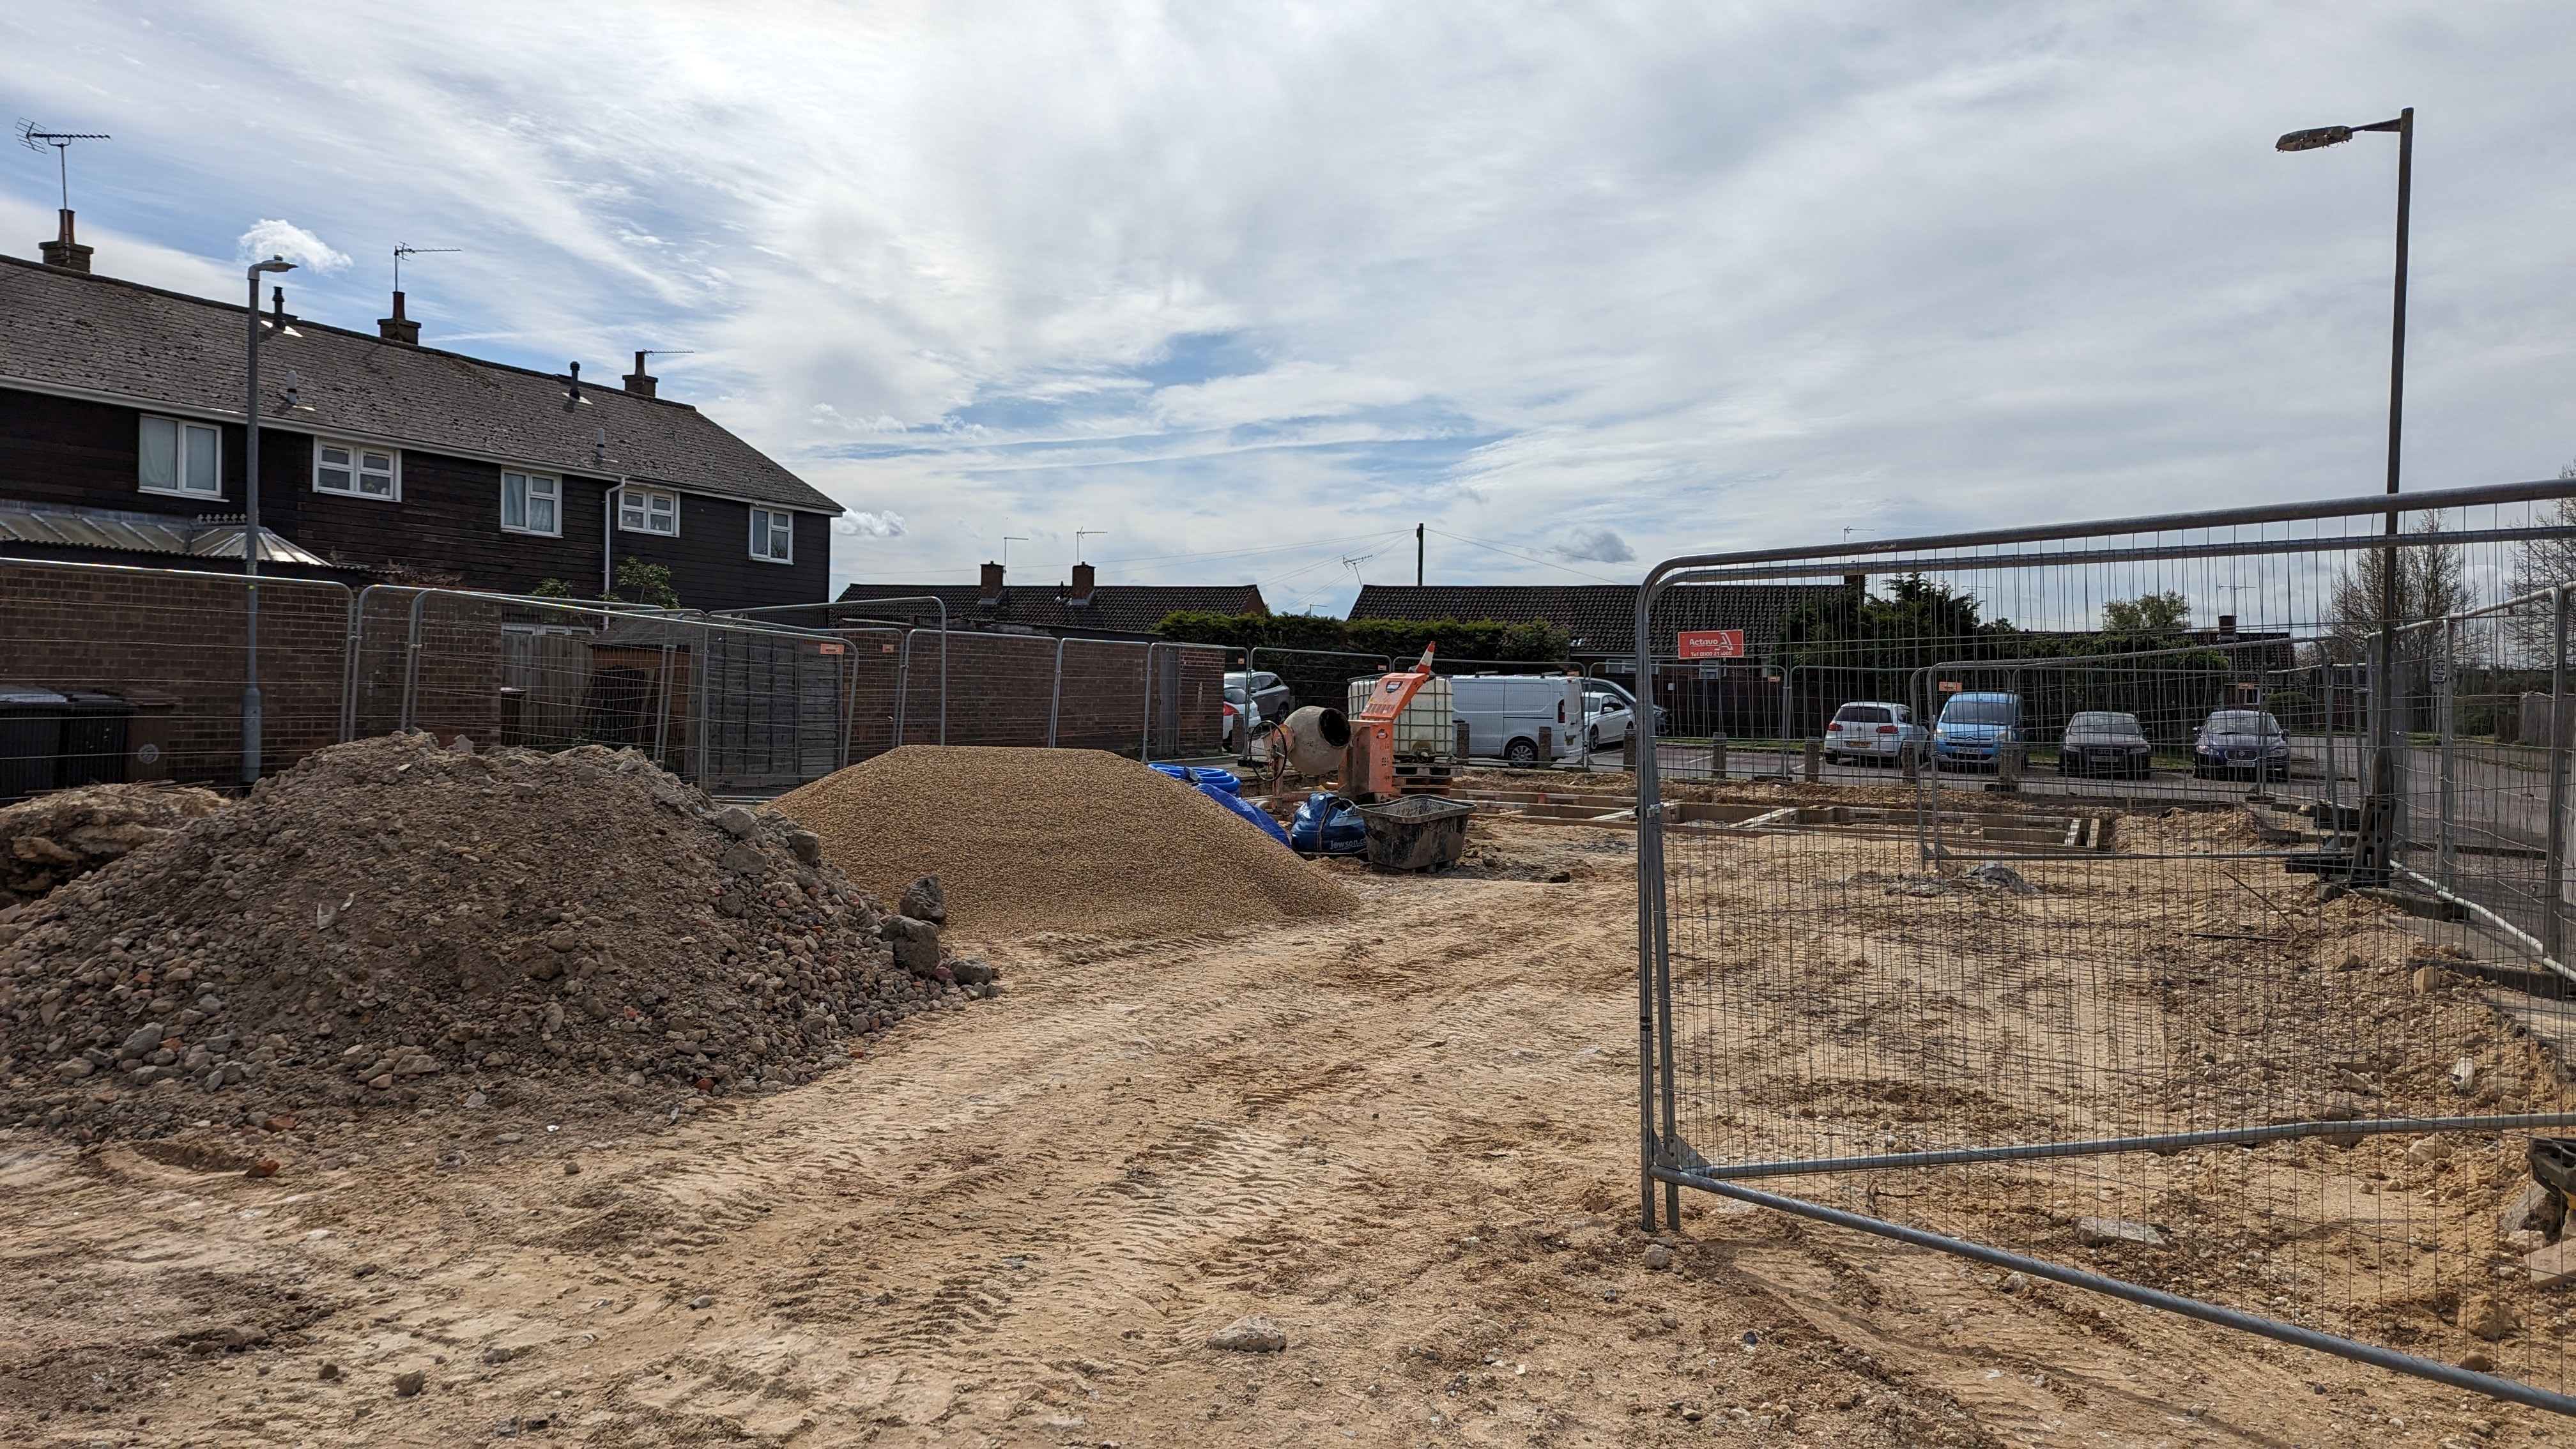 2.	Another of the building sites to become affordable homes in Mildenhall